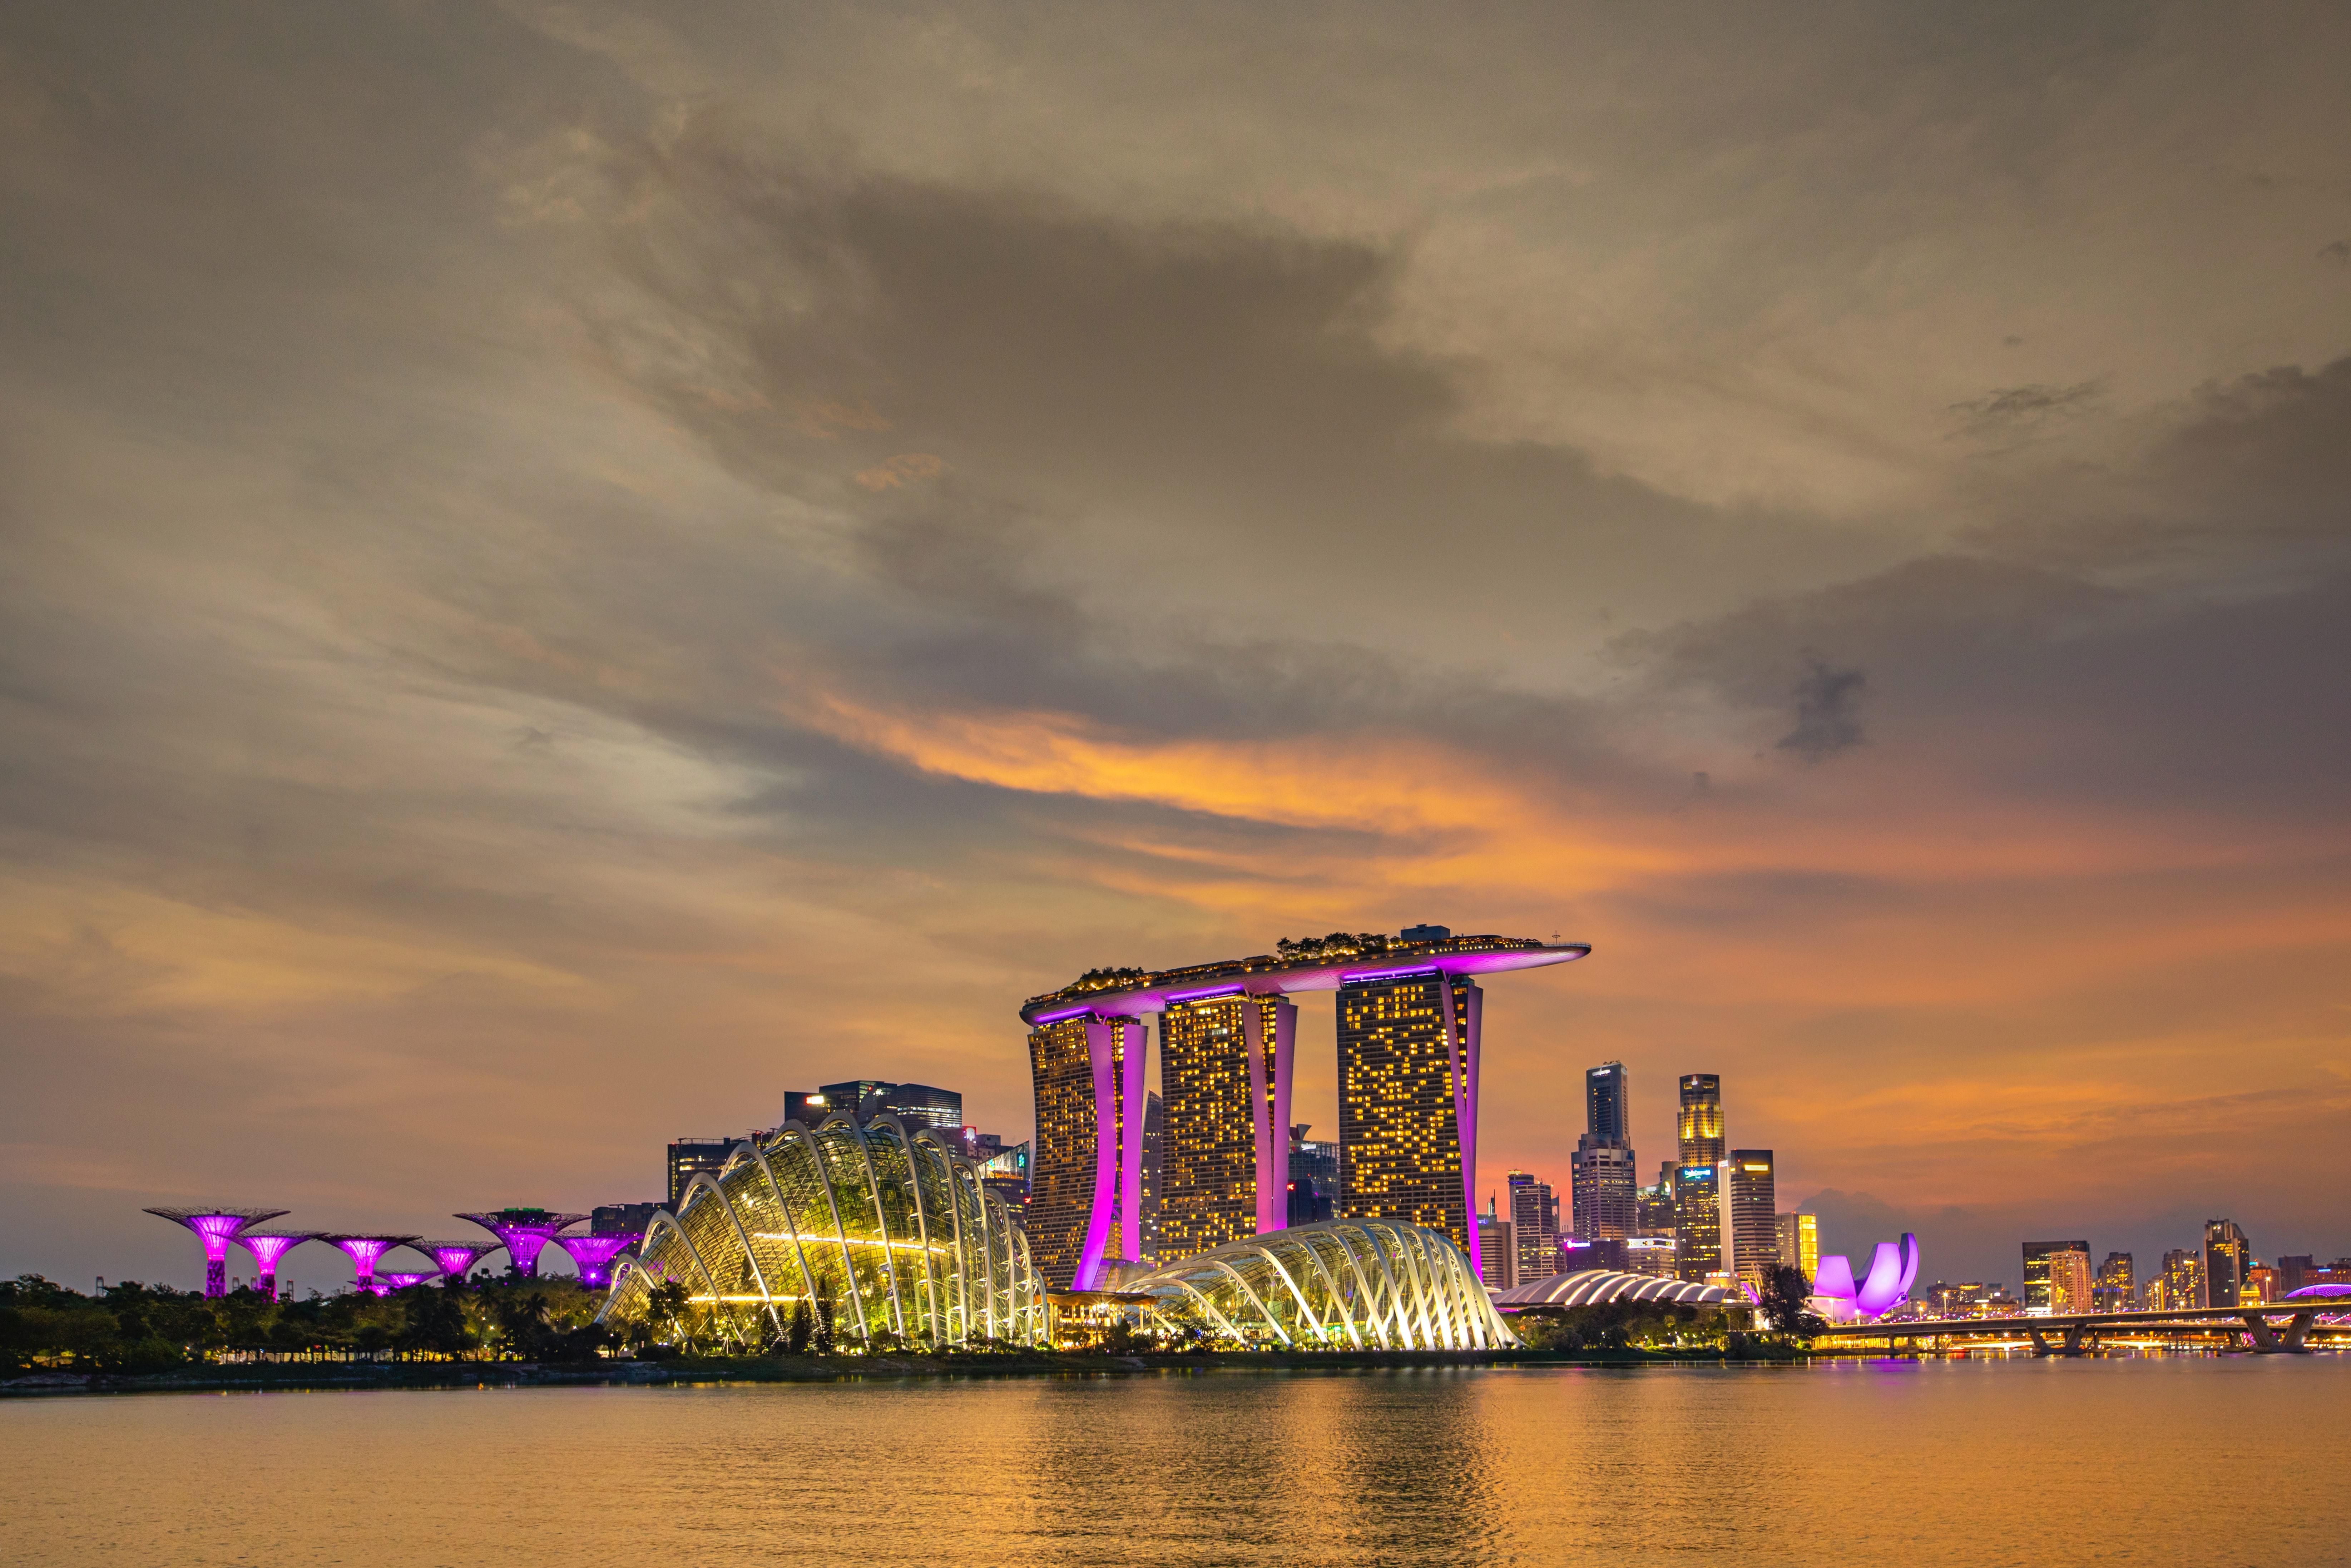 Mobile wallpaper: Cities, Sunset, Architecture, City, Building, Reflection,  Singapore, Man Made, 486318 download the picture for free.